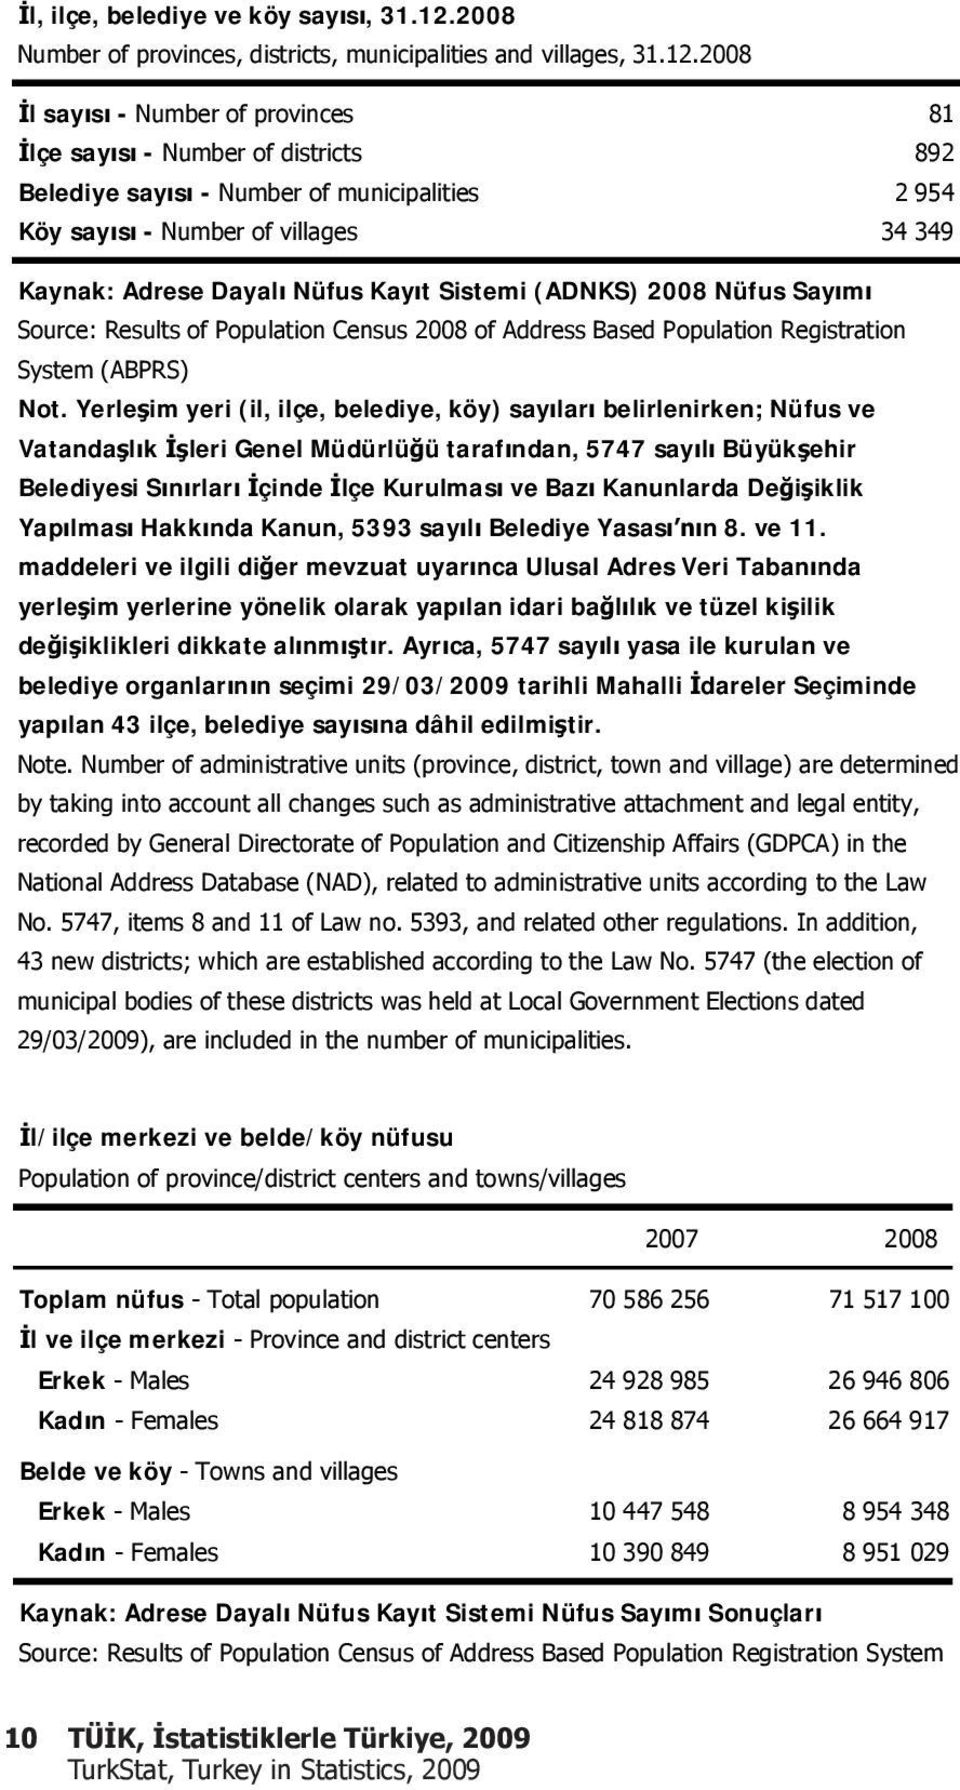 2008 l say s - Number of provinces 81 lçe say s - Number of districts 892 Belediye say s - Number of municipalities 2 954 Köy say s - Number of villages 34 349 Kaynak: Adrese Dayal Nüfus Kay t